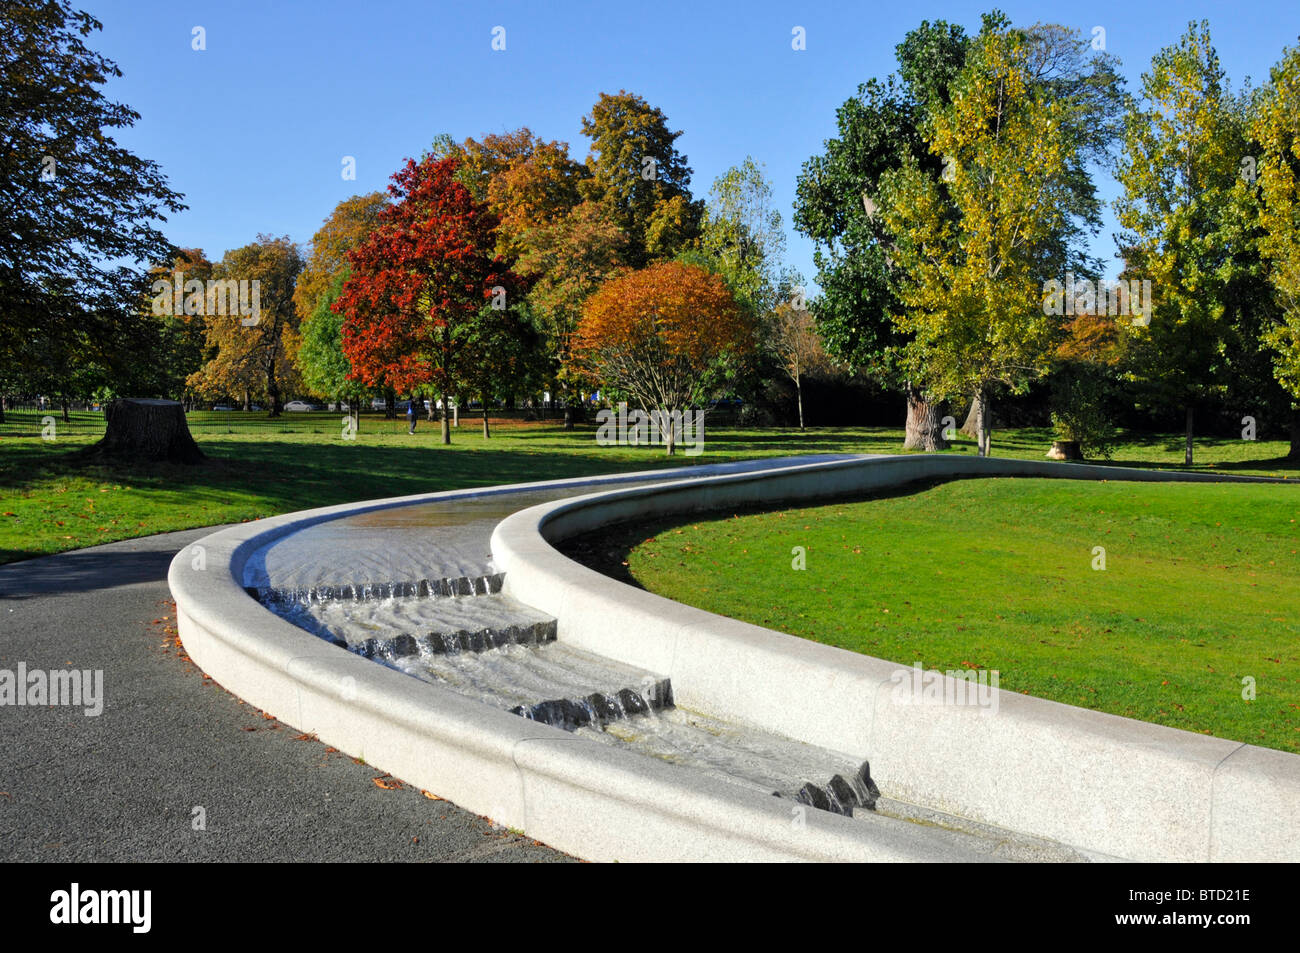 Princess Diana memorial fountain in Hyde Park London England UK forming a circular artificial rill water feature with Autumn colours on trees Stock Photo